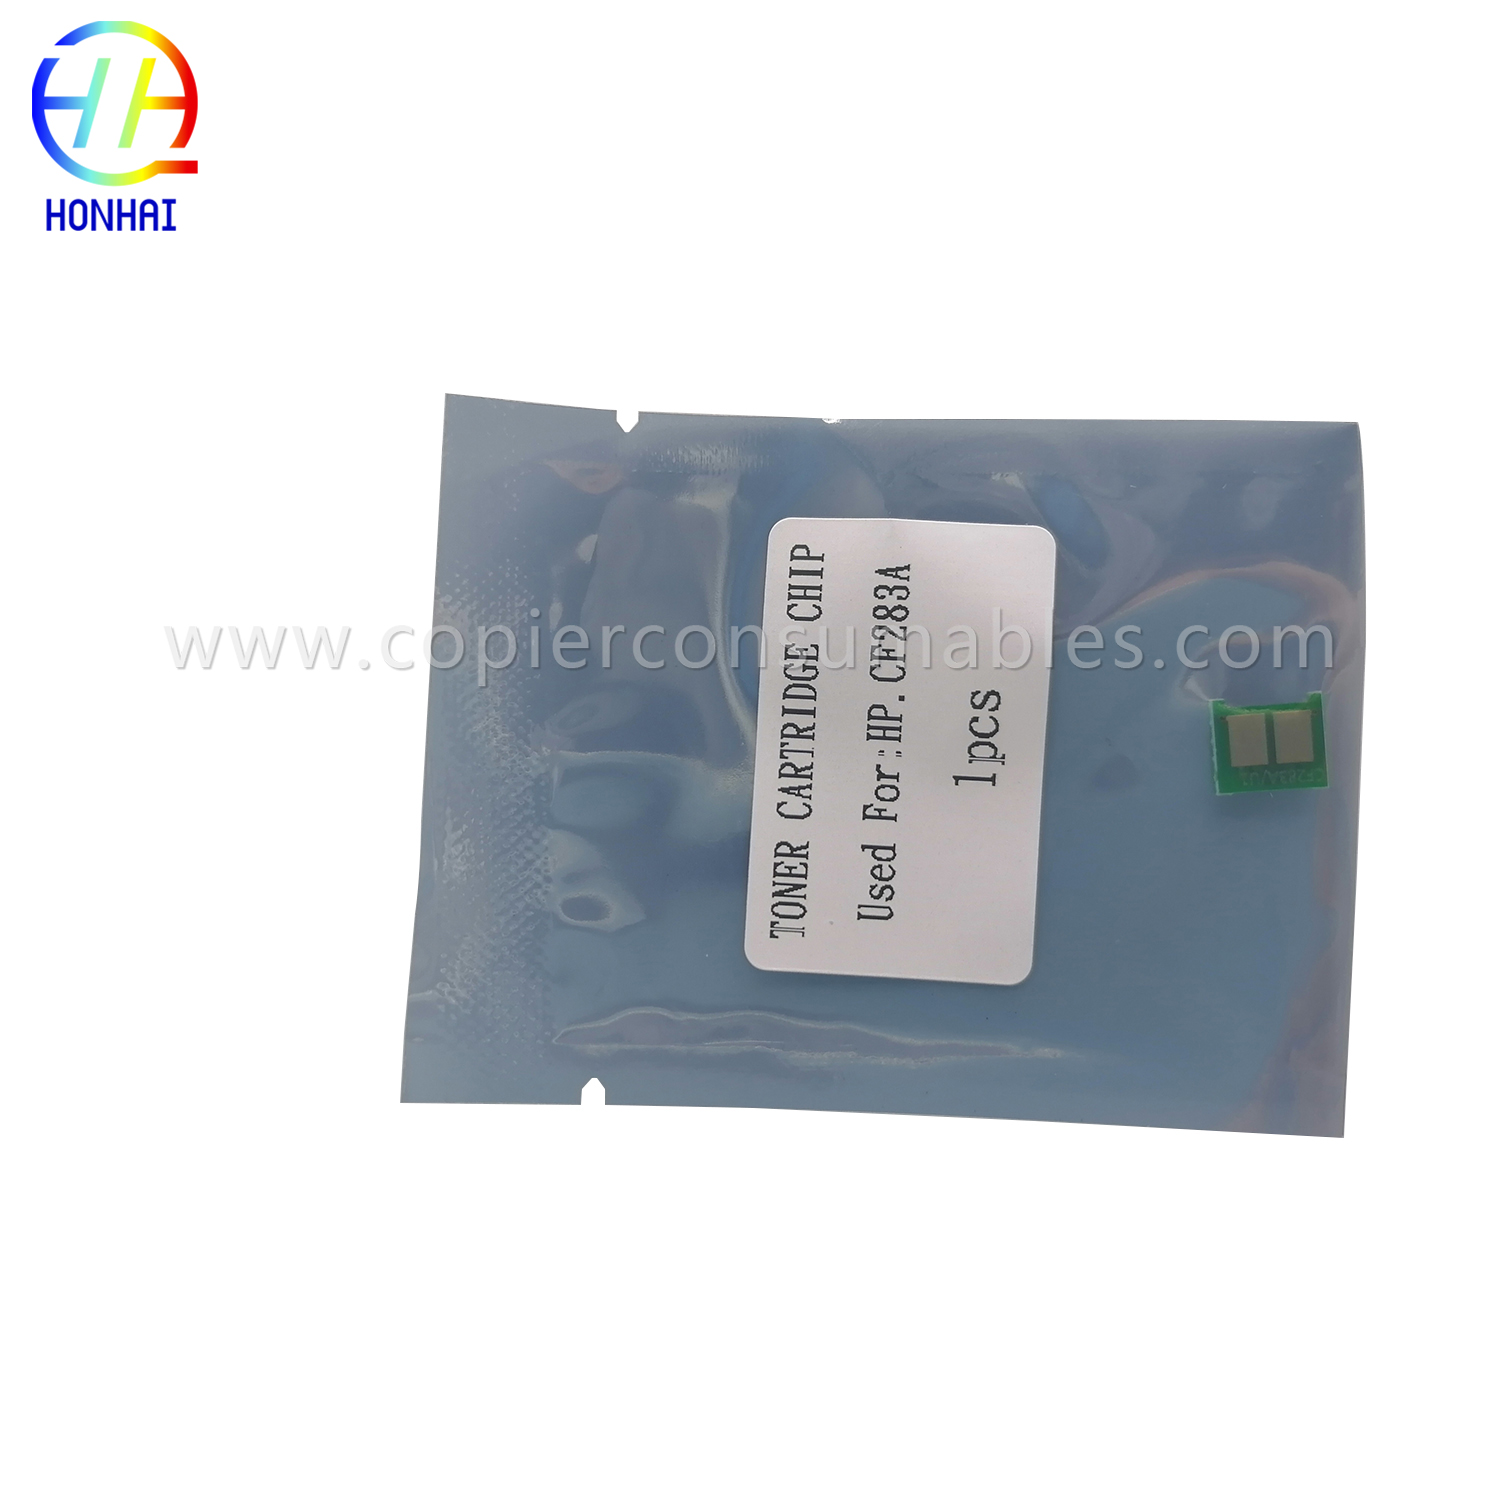 Toner Chip for HP M201 CF283A